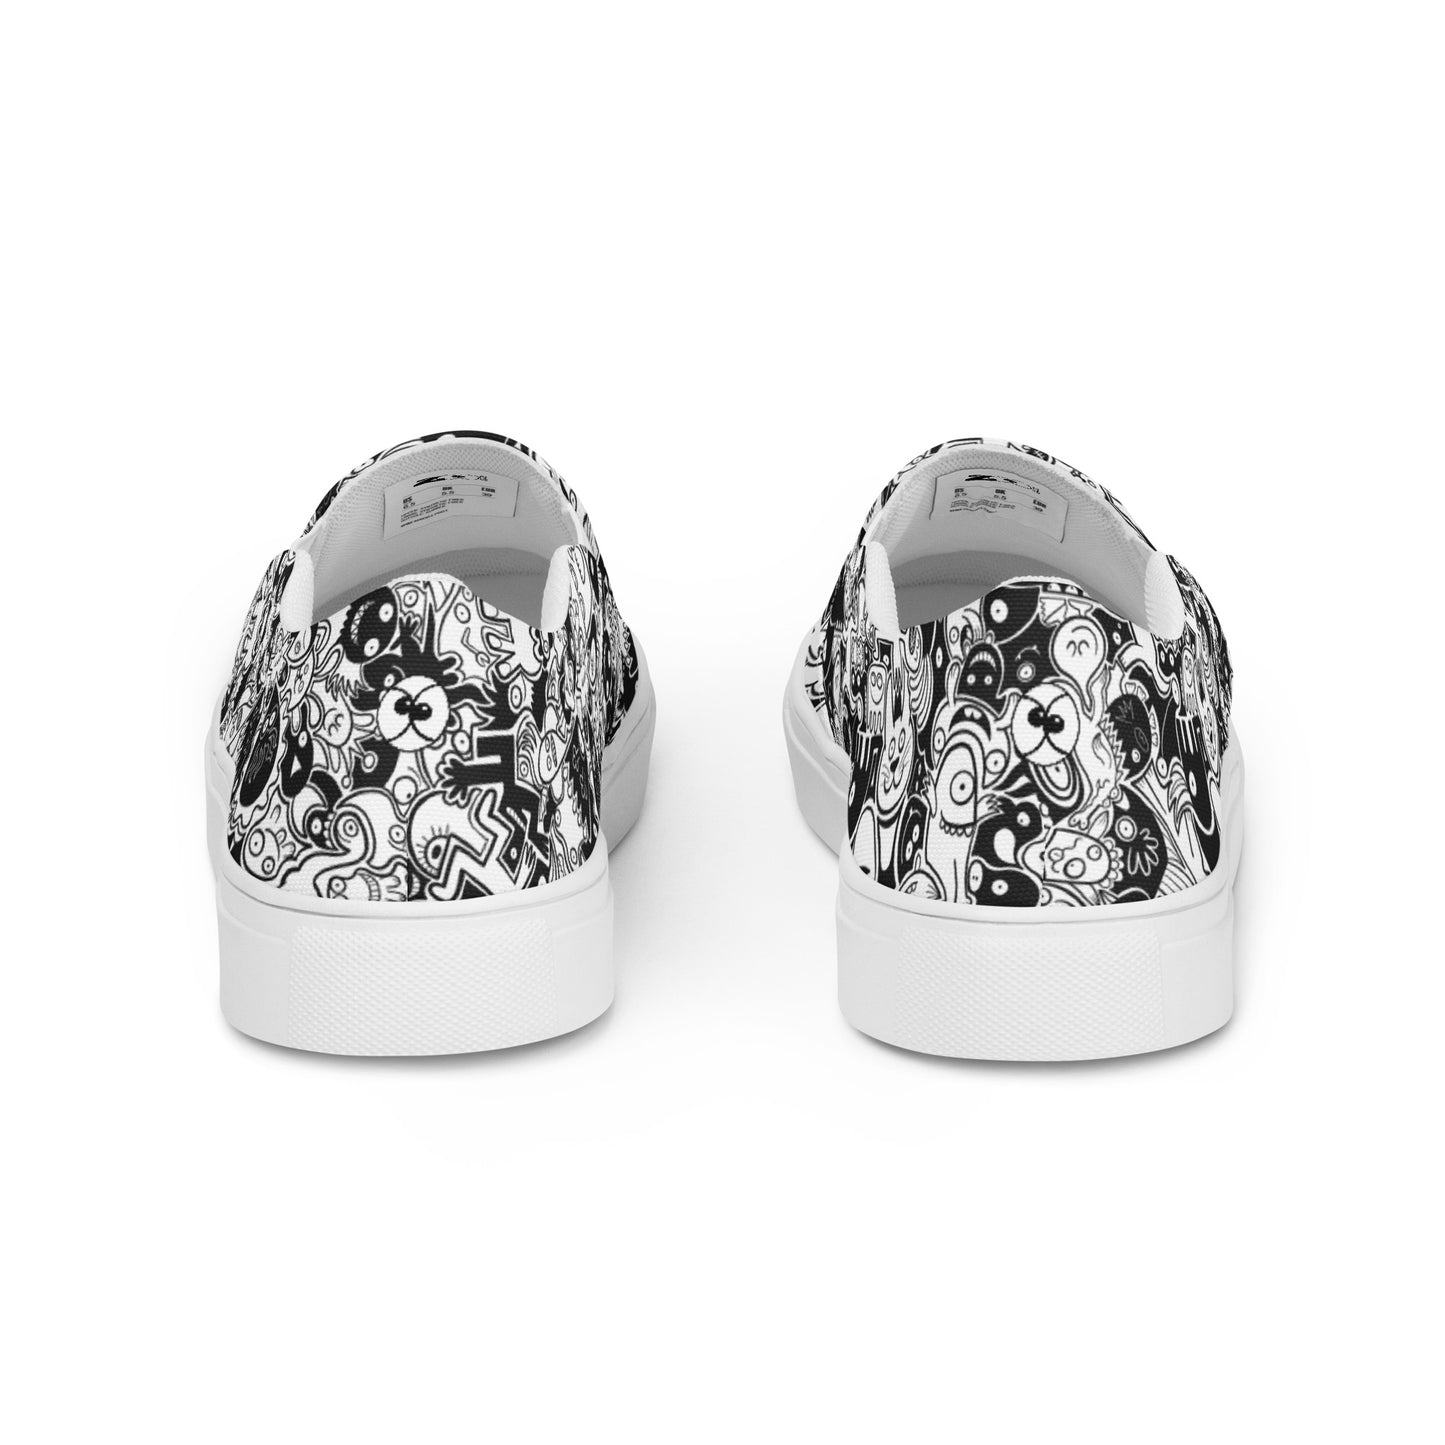 Joyful crowd of black and white doodle creatures Men’s slip-on canvas shoes. Back view